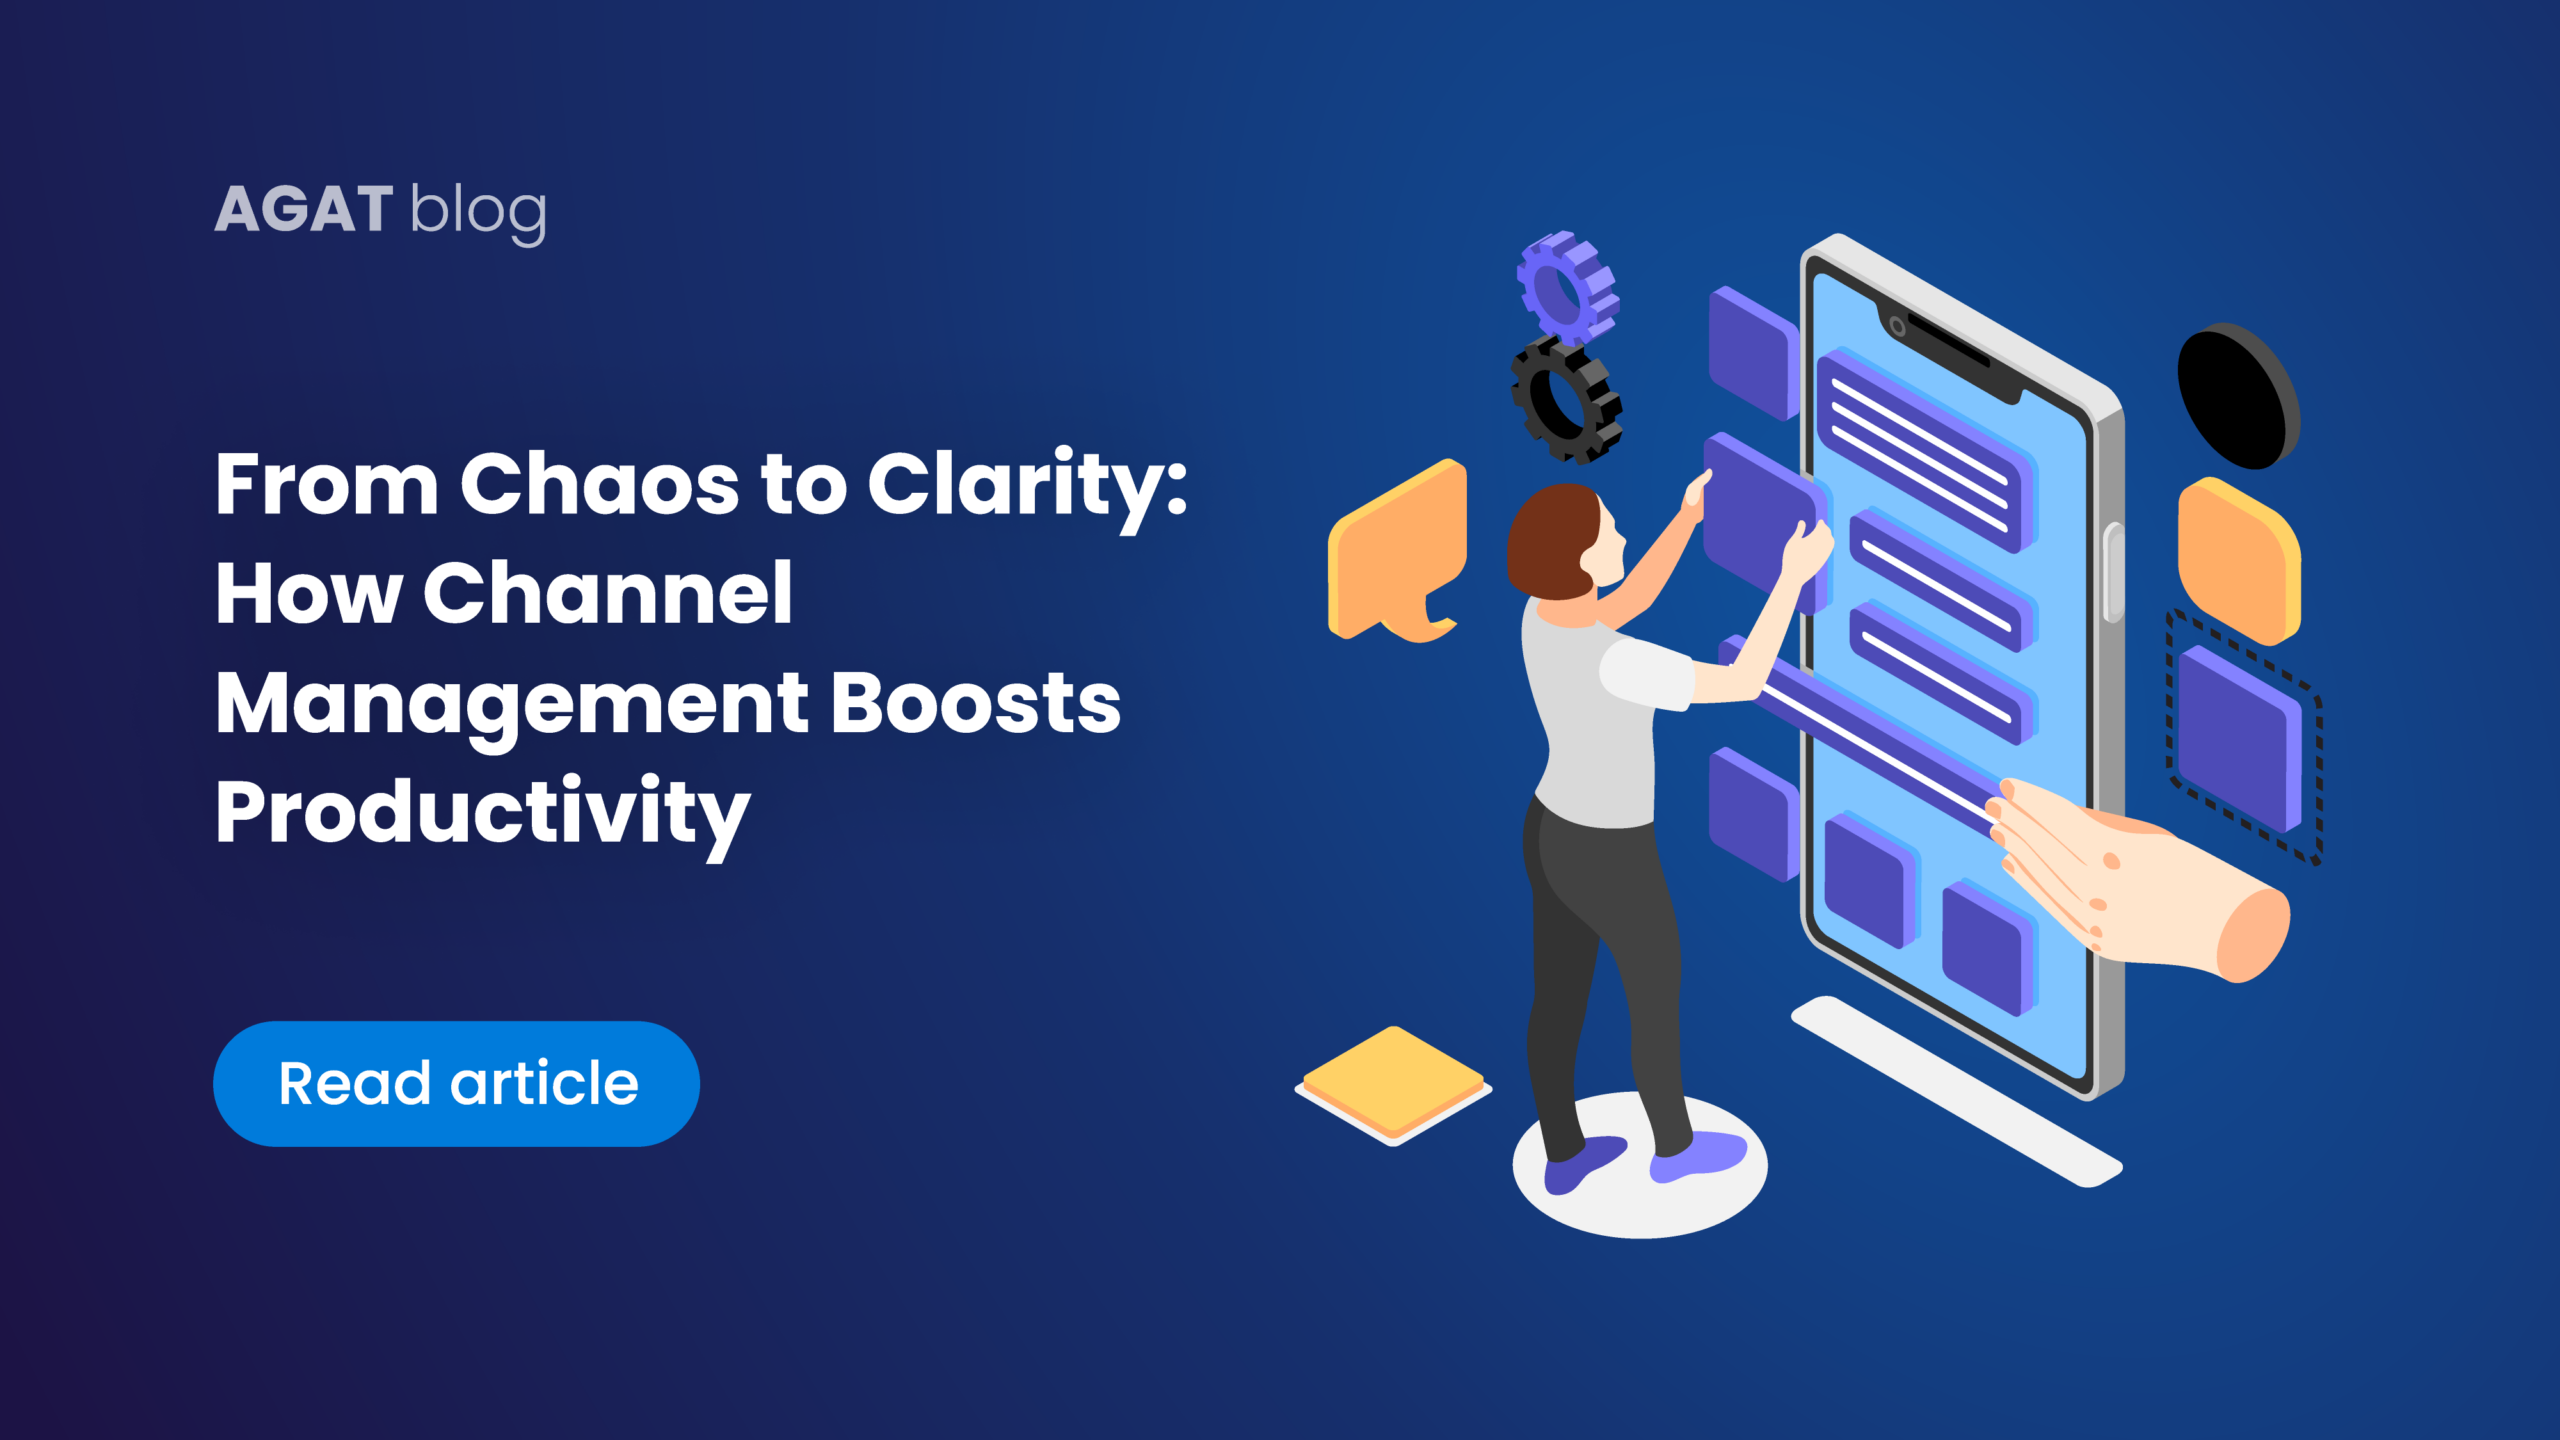 From Chaos to Clarity: How Channel Management Boosts Productivity